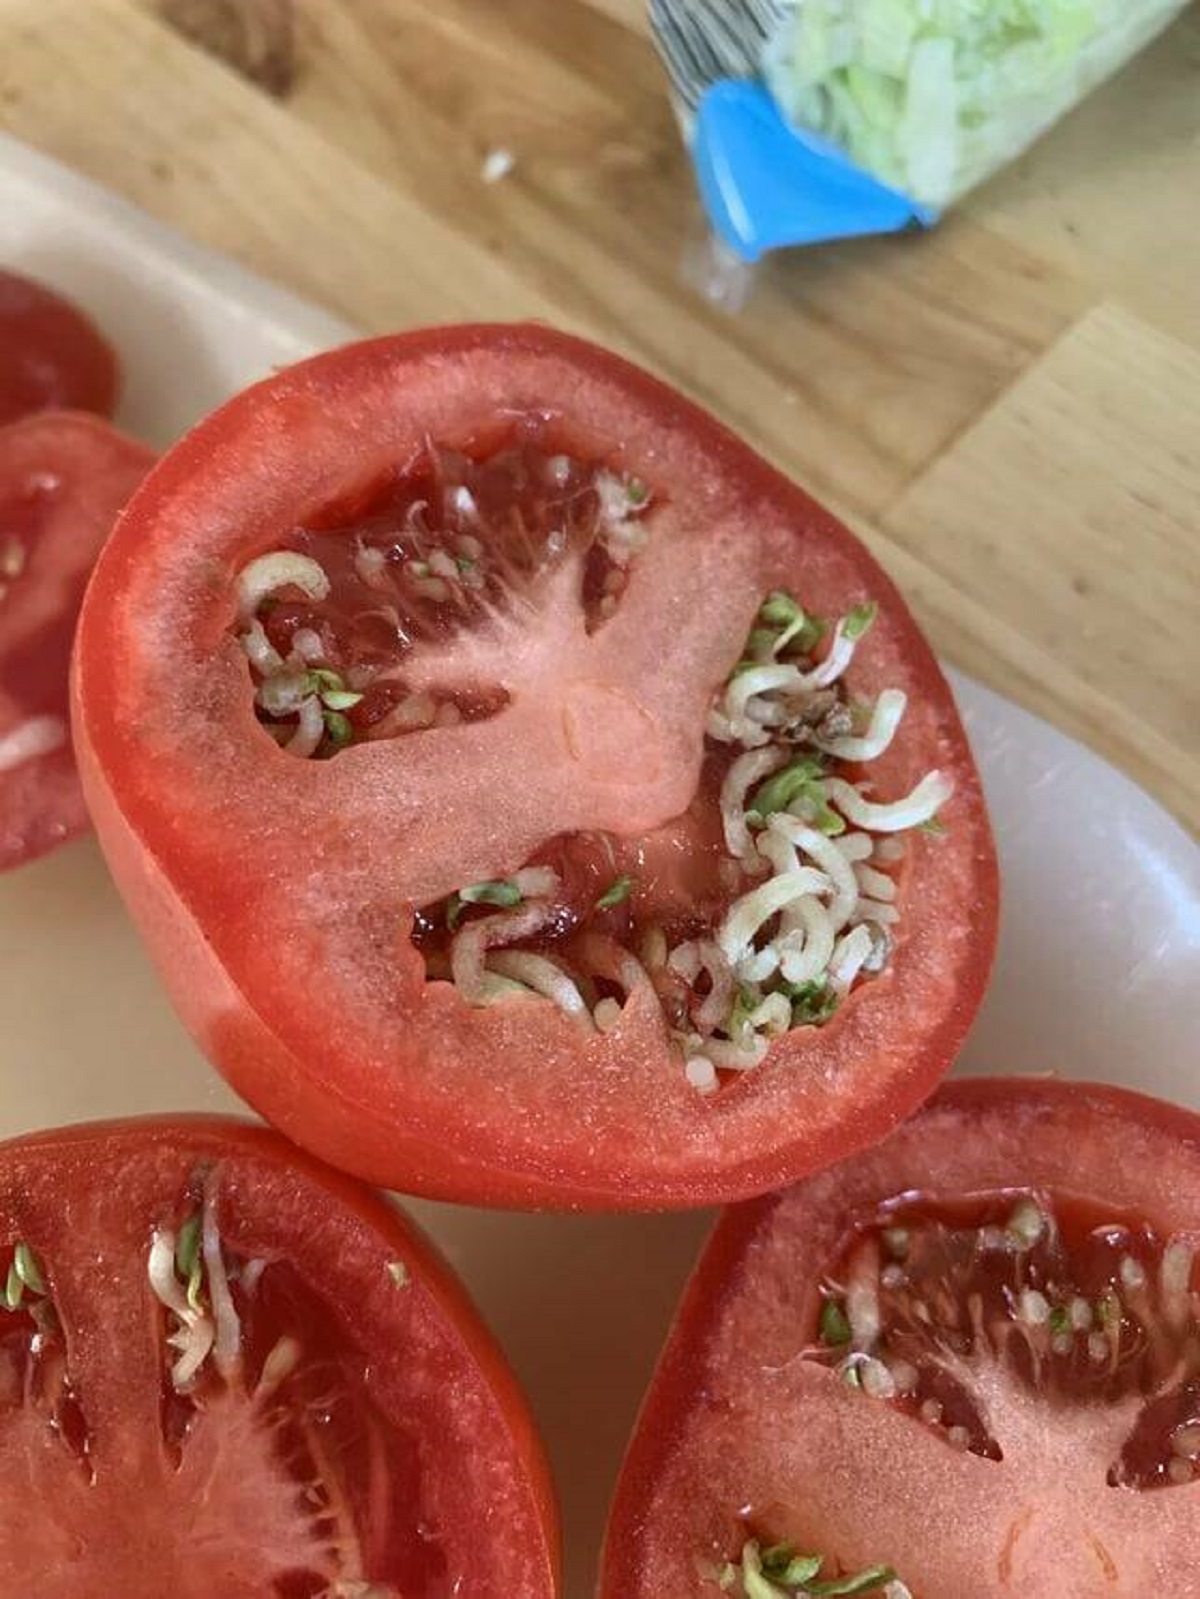 "My tomatoes sprouted internally, and could only tell when I cut them open."